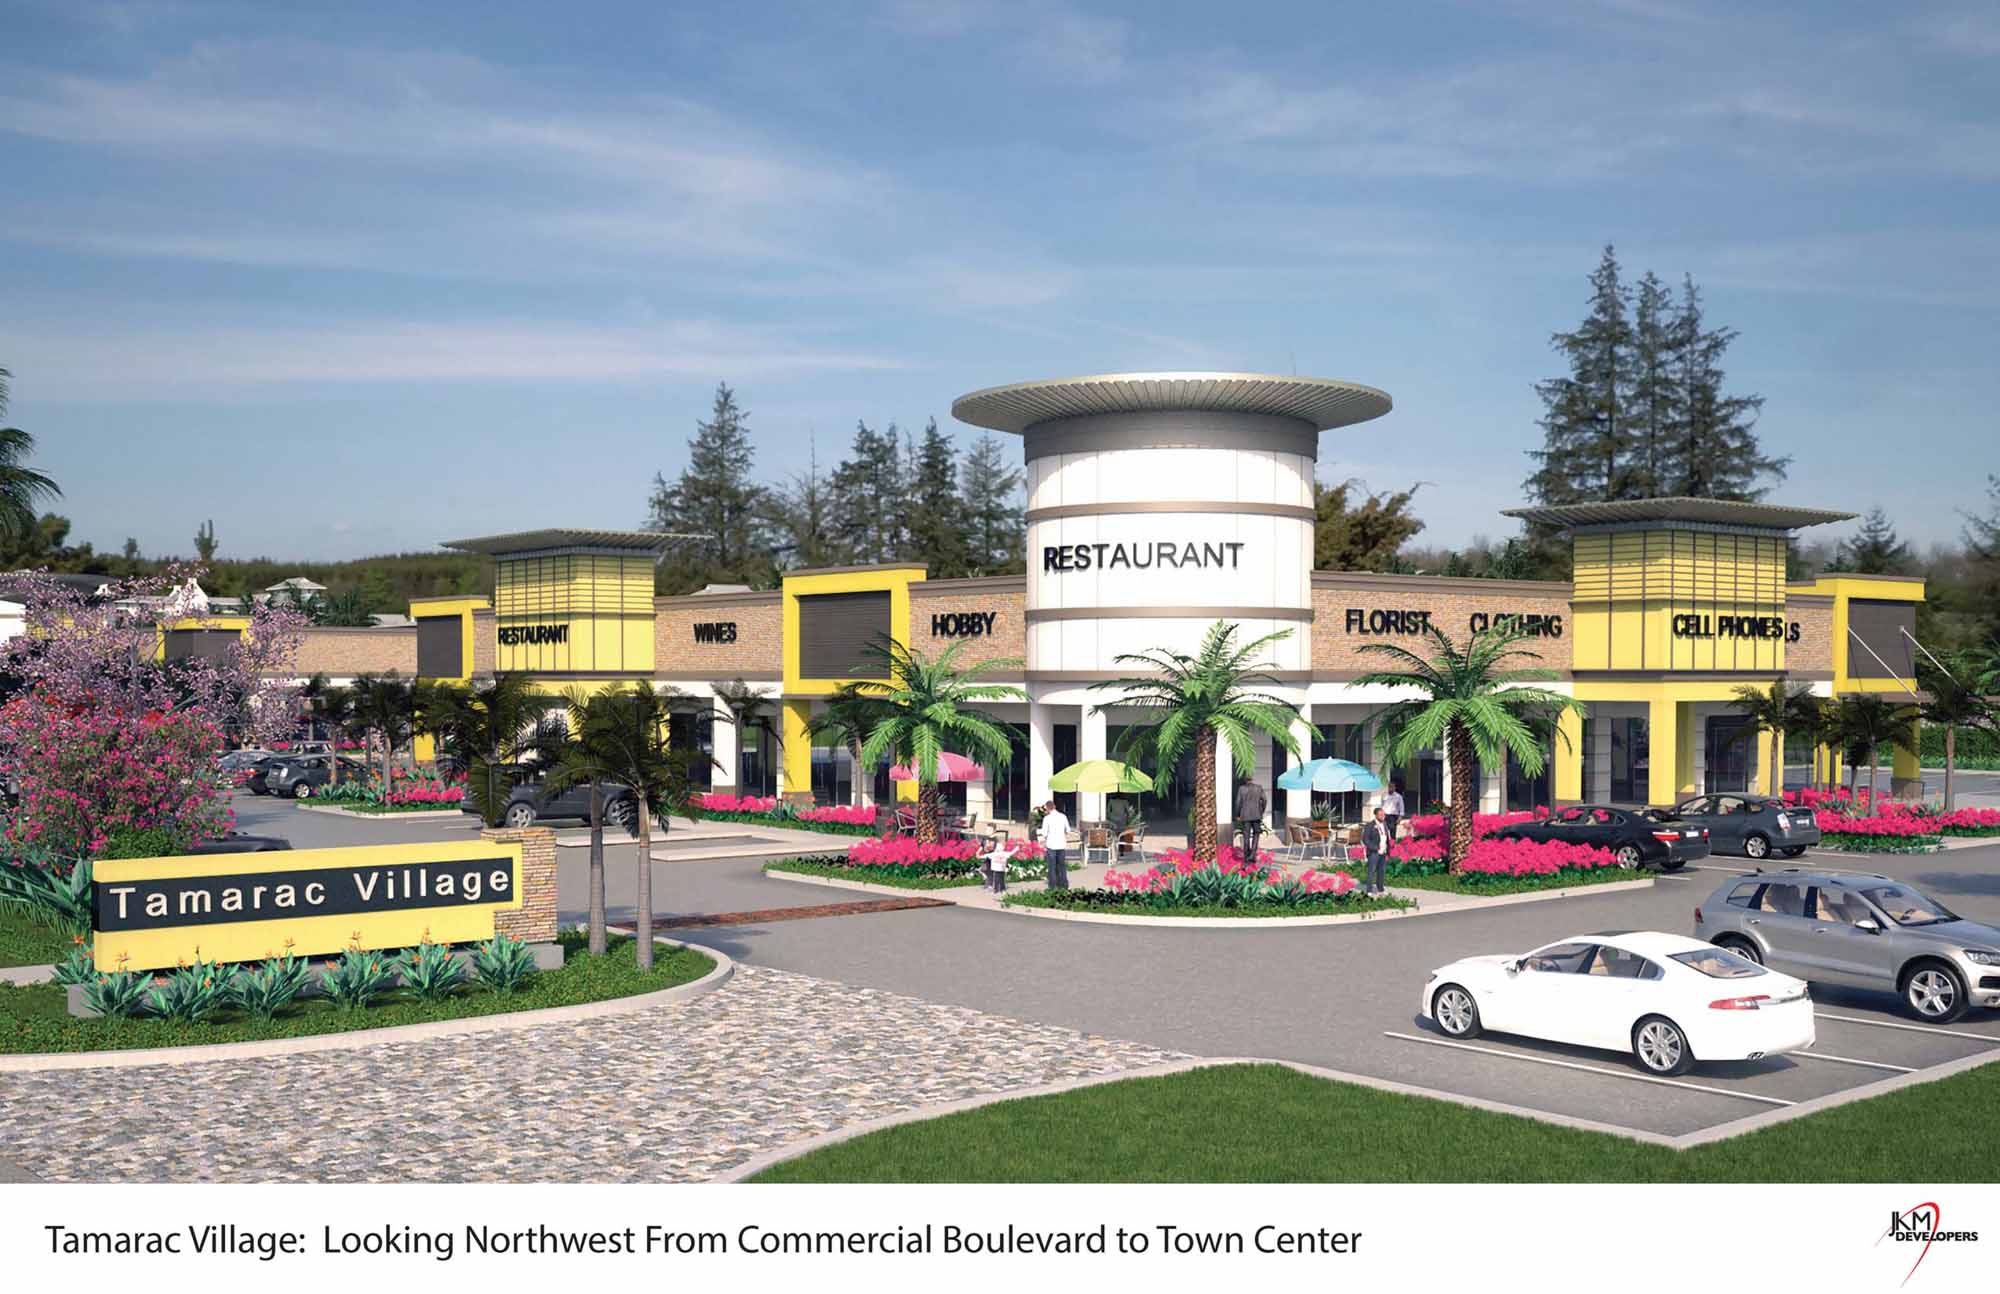 Construction Loan Landed for First Phase of Tamarac Village 1